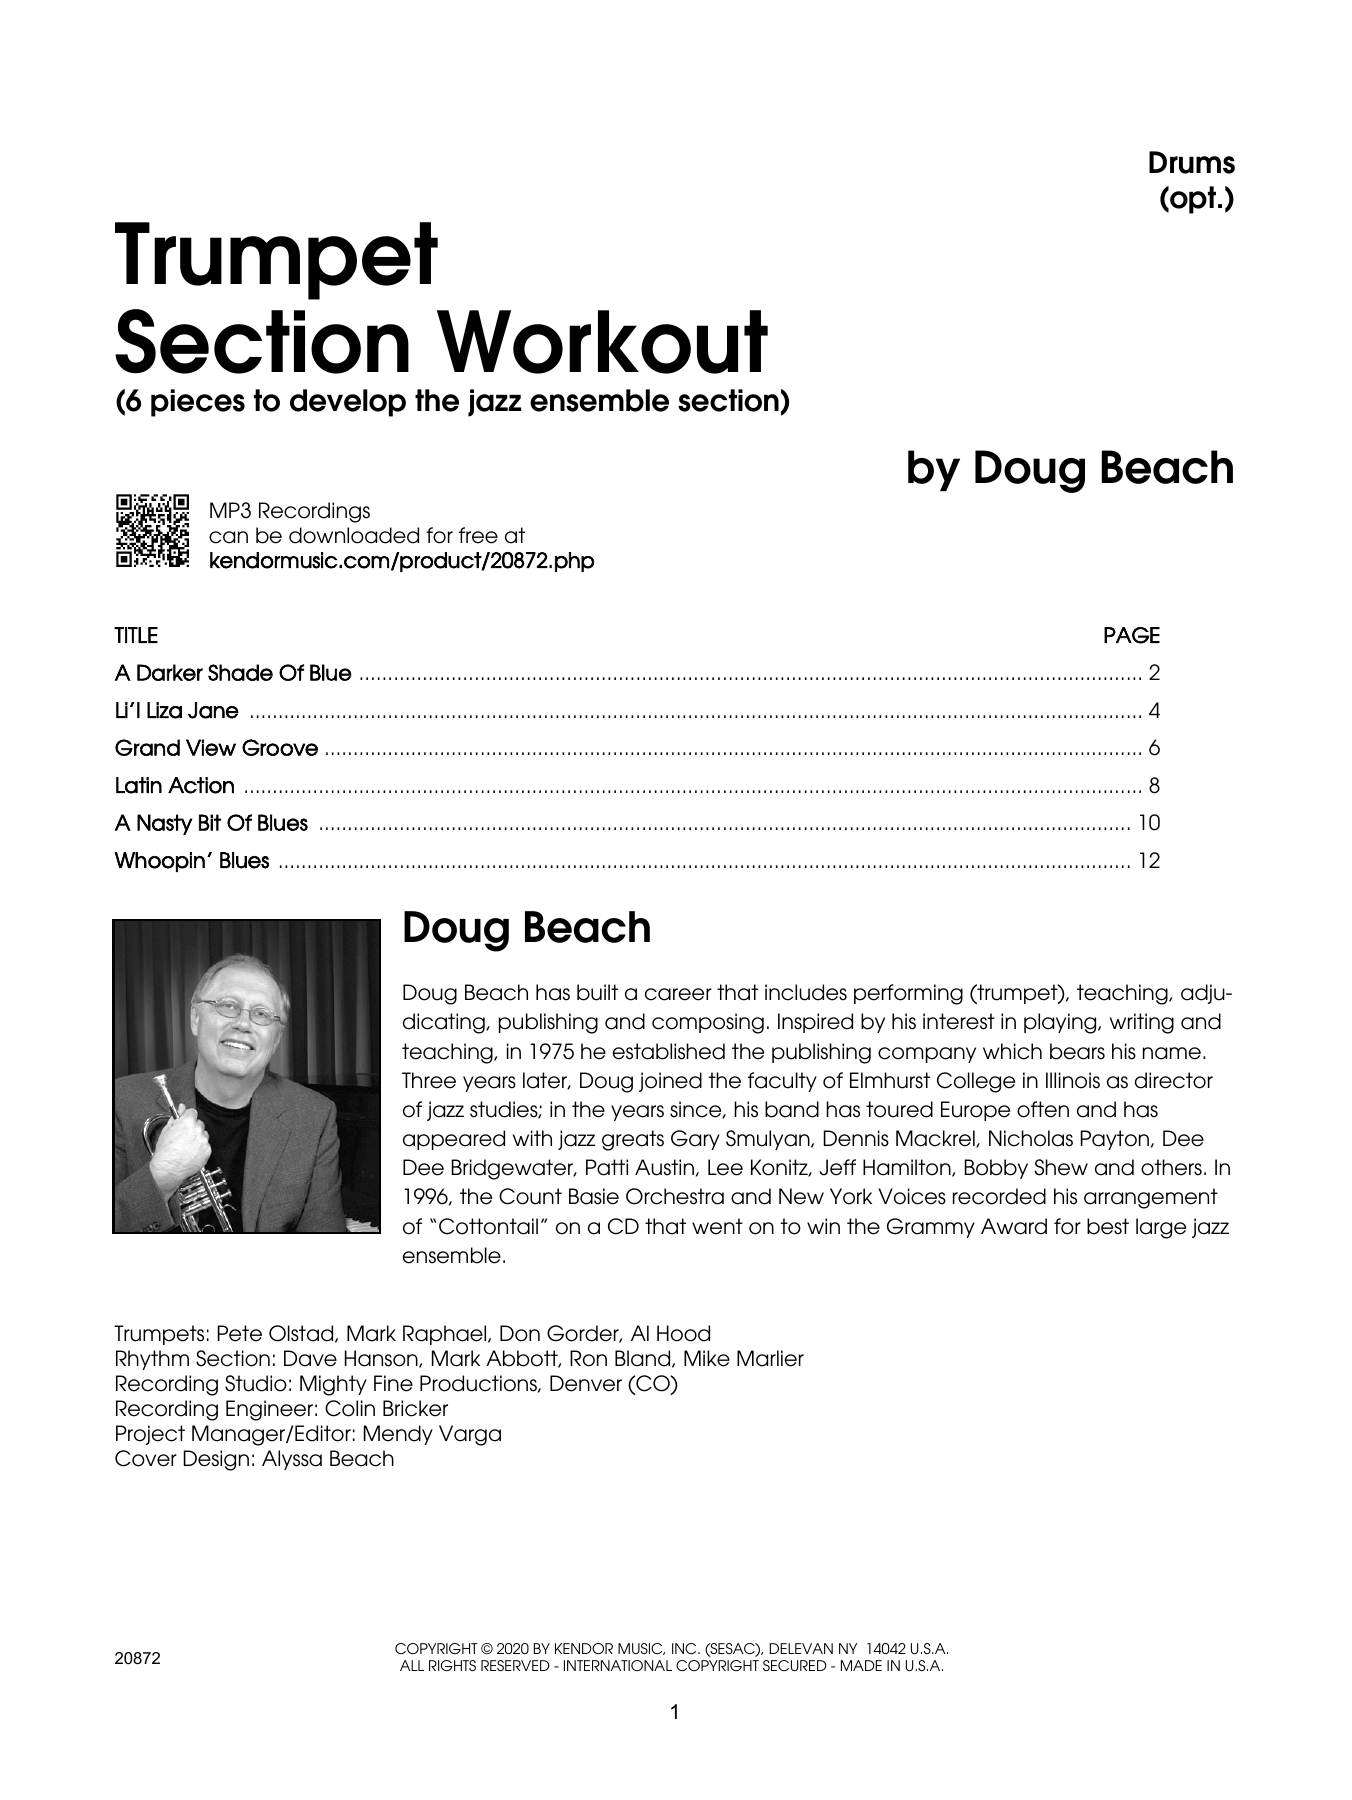 Download Doug Beach Trumpet Section Workout with MP3's (6 pieces to develop the jazz ensemble section) - Drum Set sheet music and printable PDF score & Instructional music notes